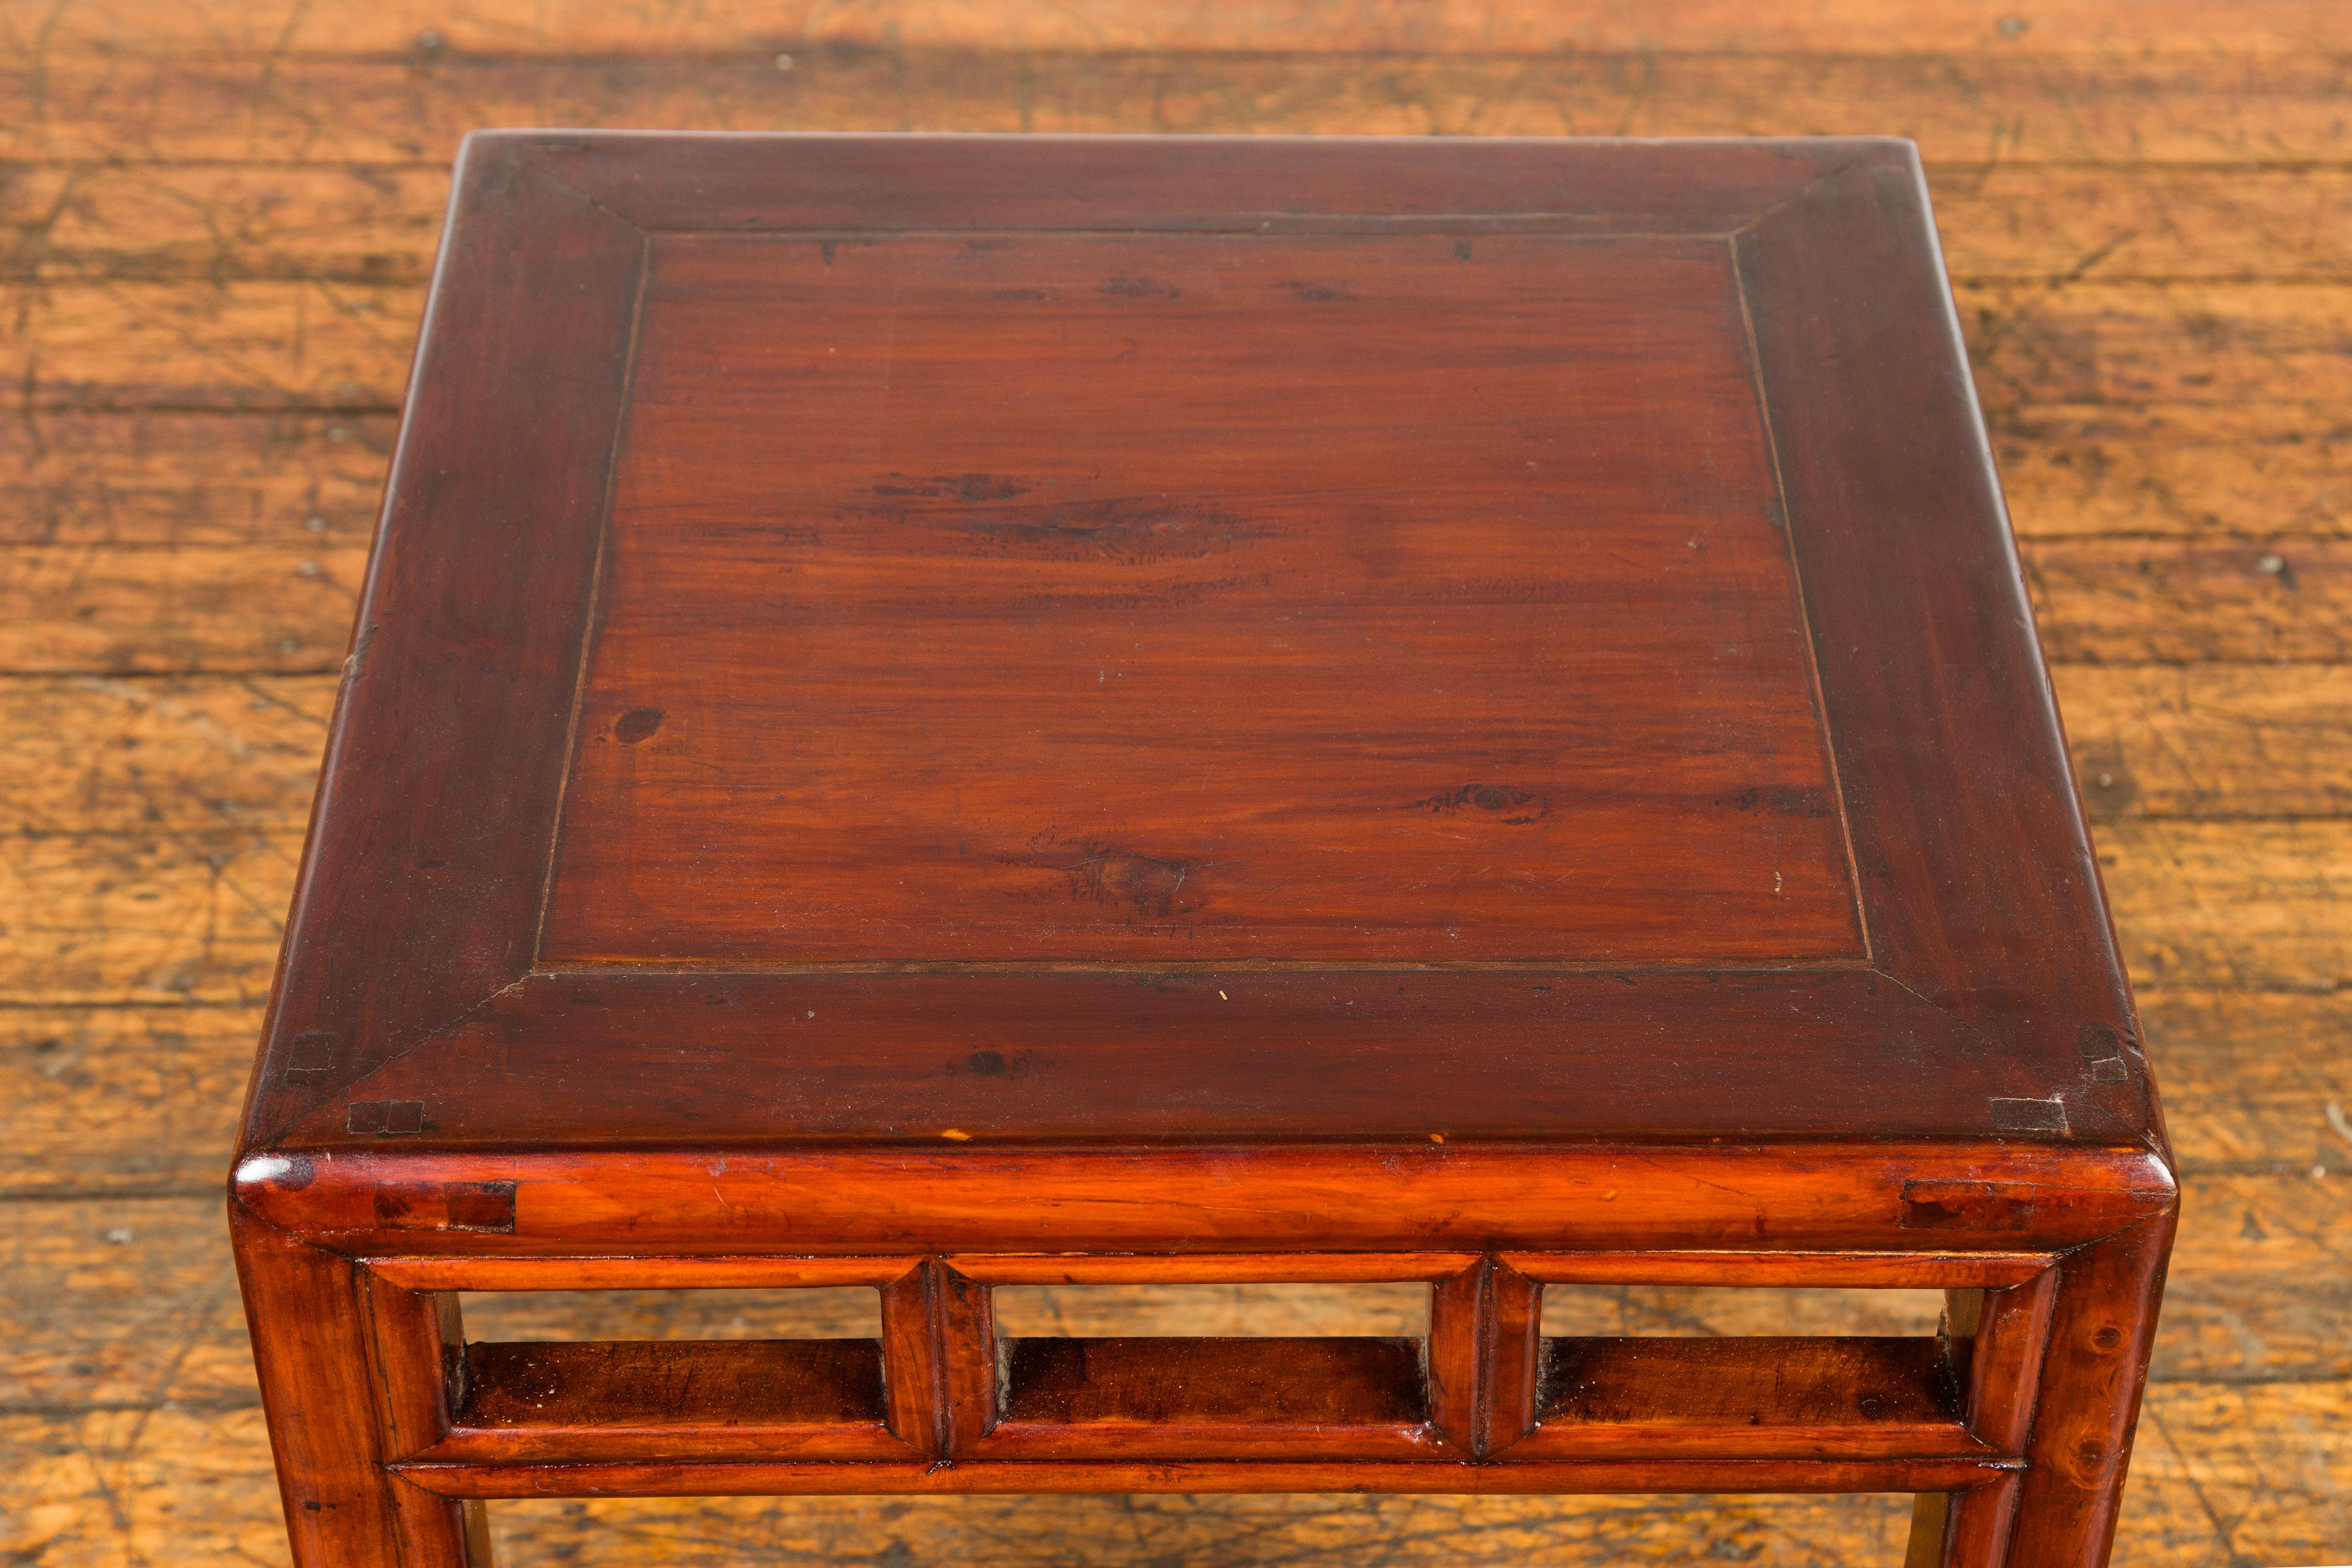 Late Qing Dynasty Small Side Table with Pillar Strut Motifs and Scrolling Feet For Sale 4